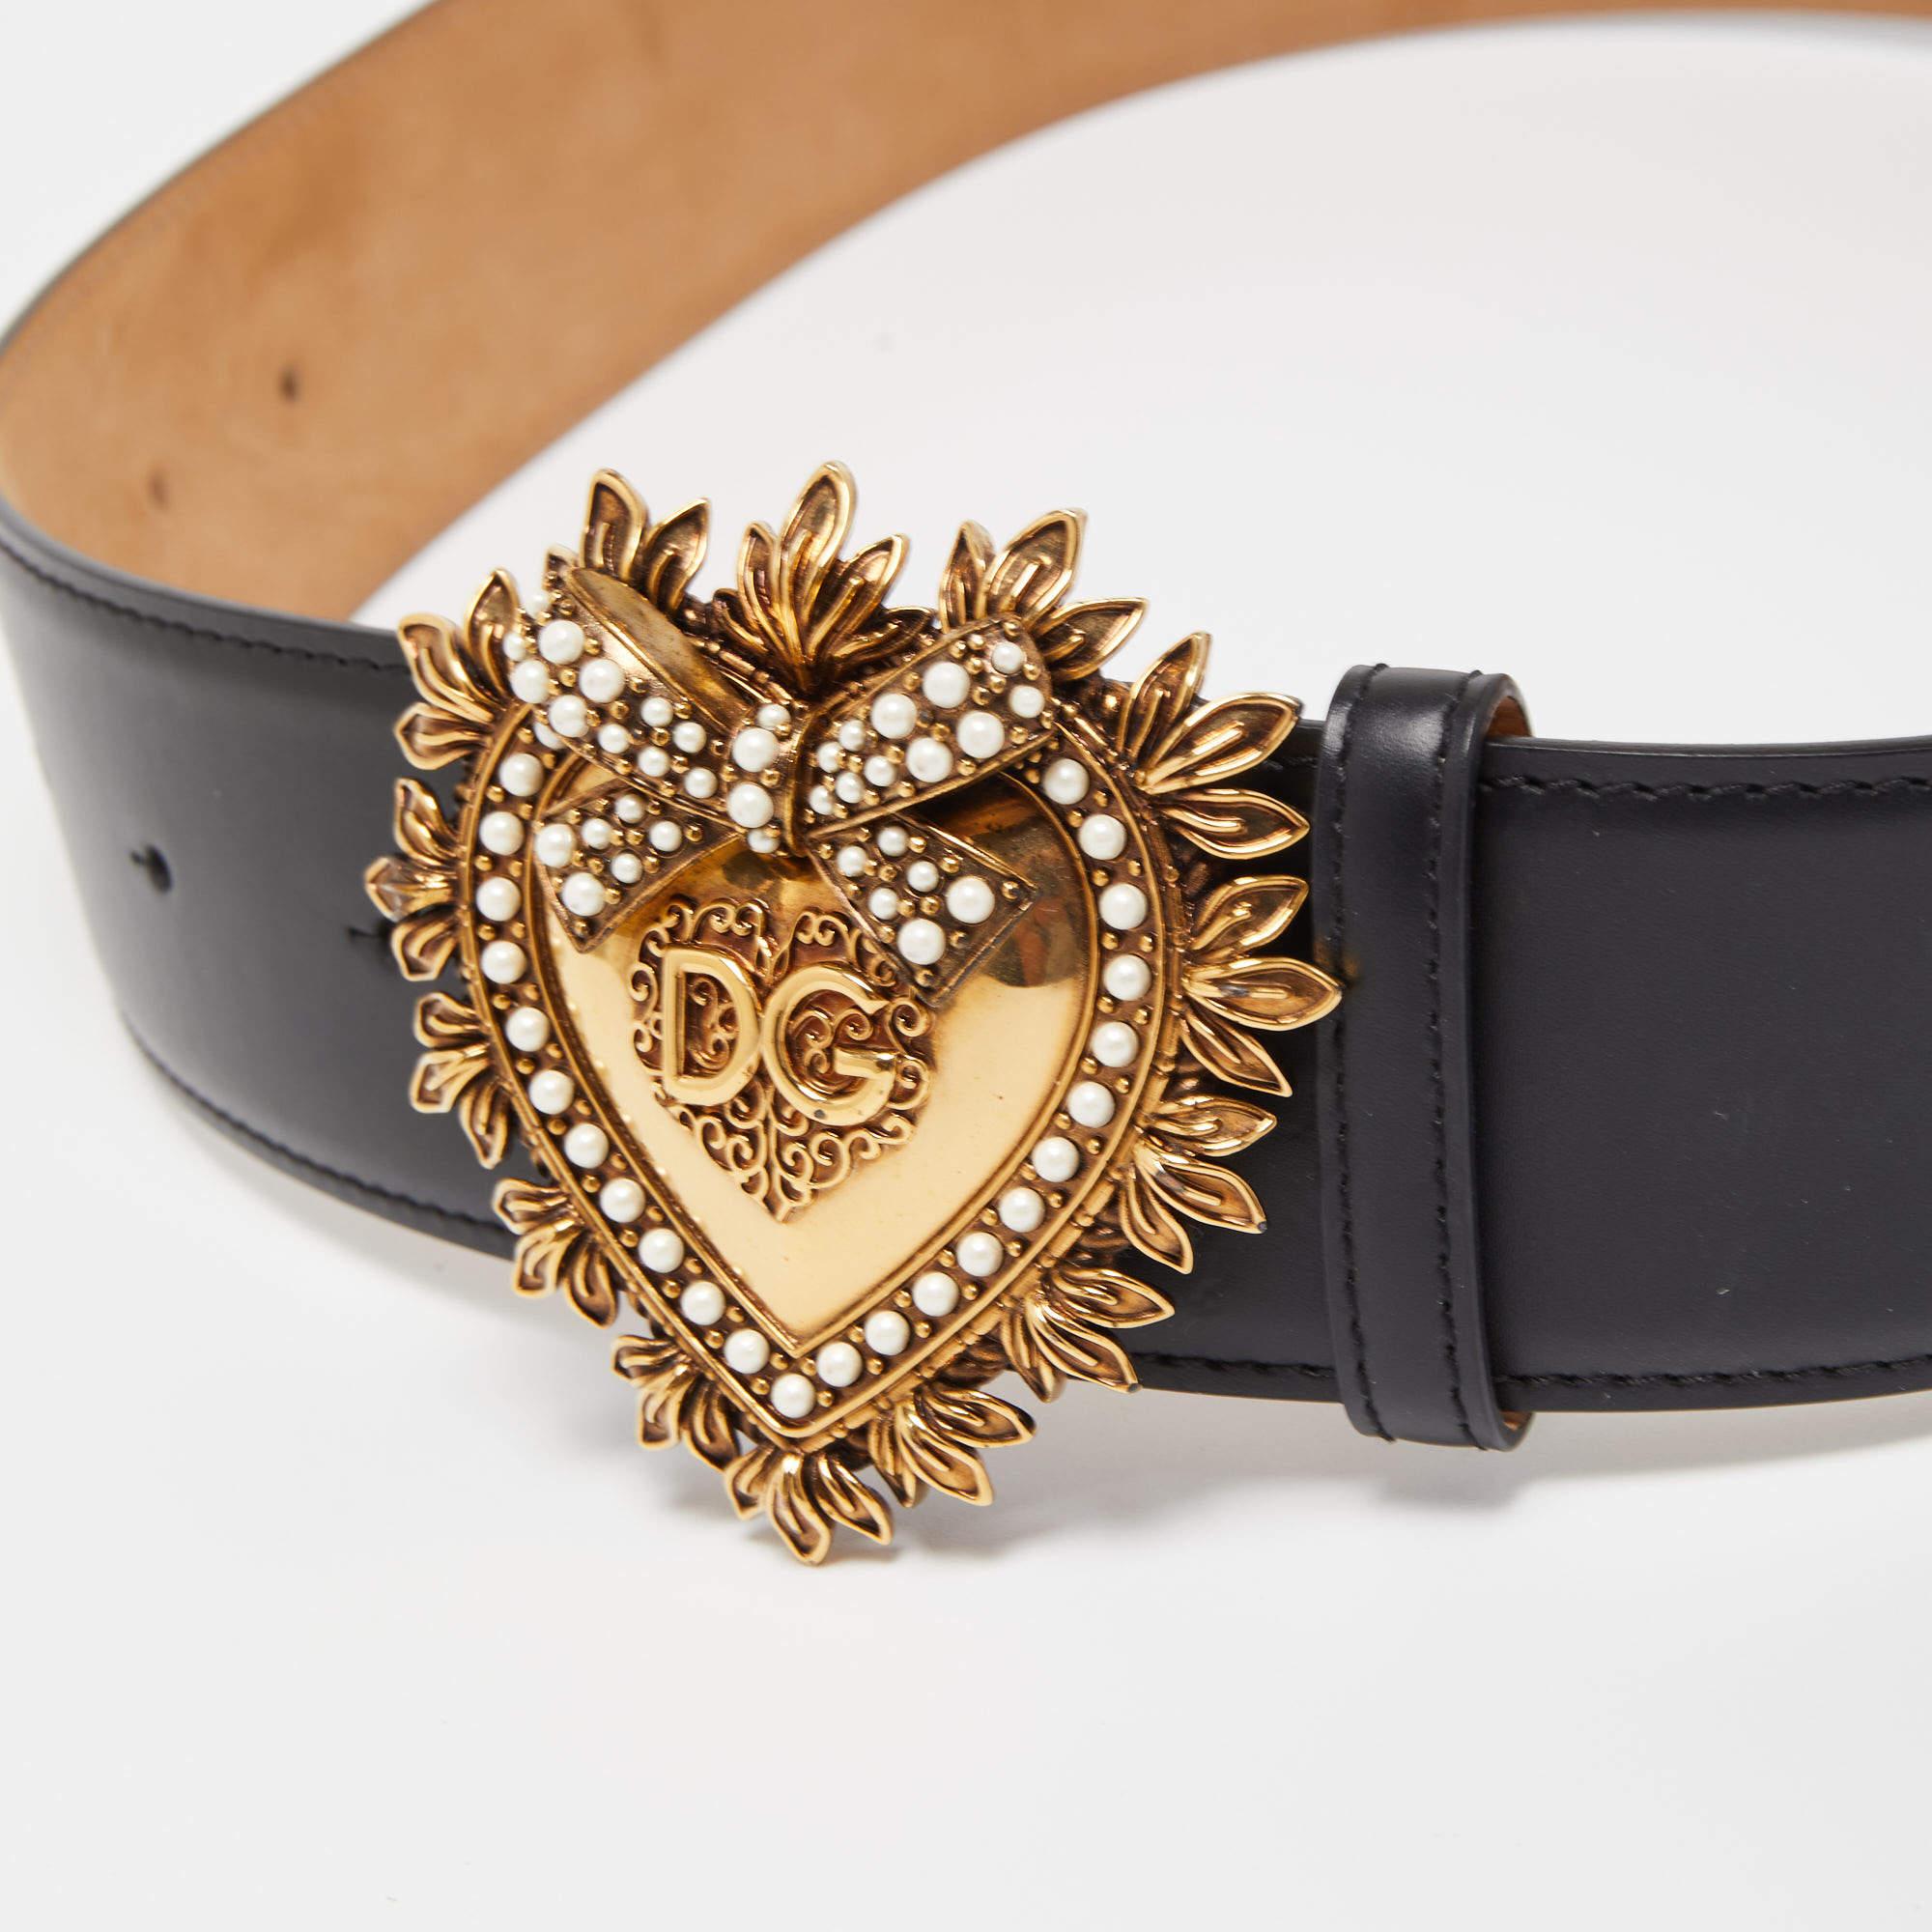 This Dolce & Gabbana belt has a magnificent Devotion heart buckle in gold-tone metal embellished with crystals. Crafted from durable black leather, the belt has a single loop and it will easily add a luxe touch to your ensemble.

